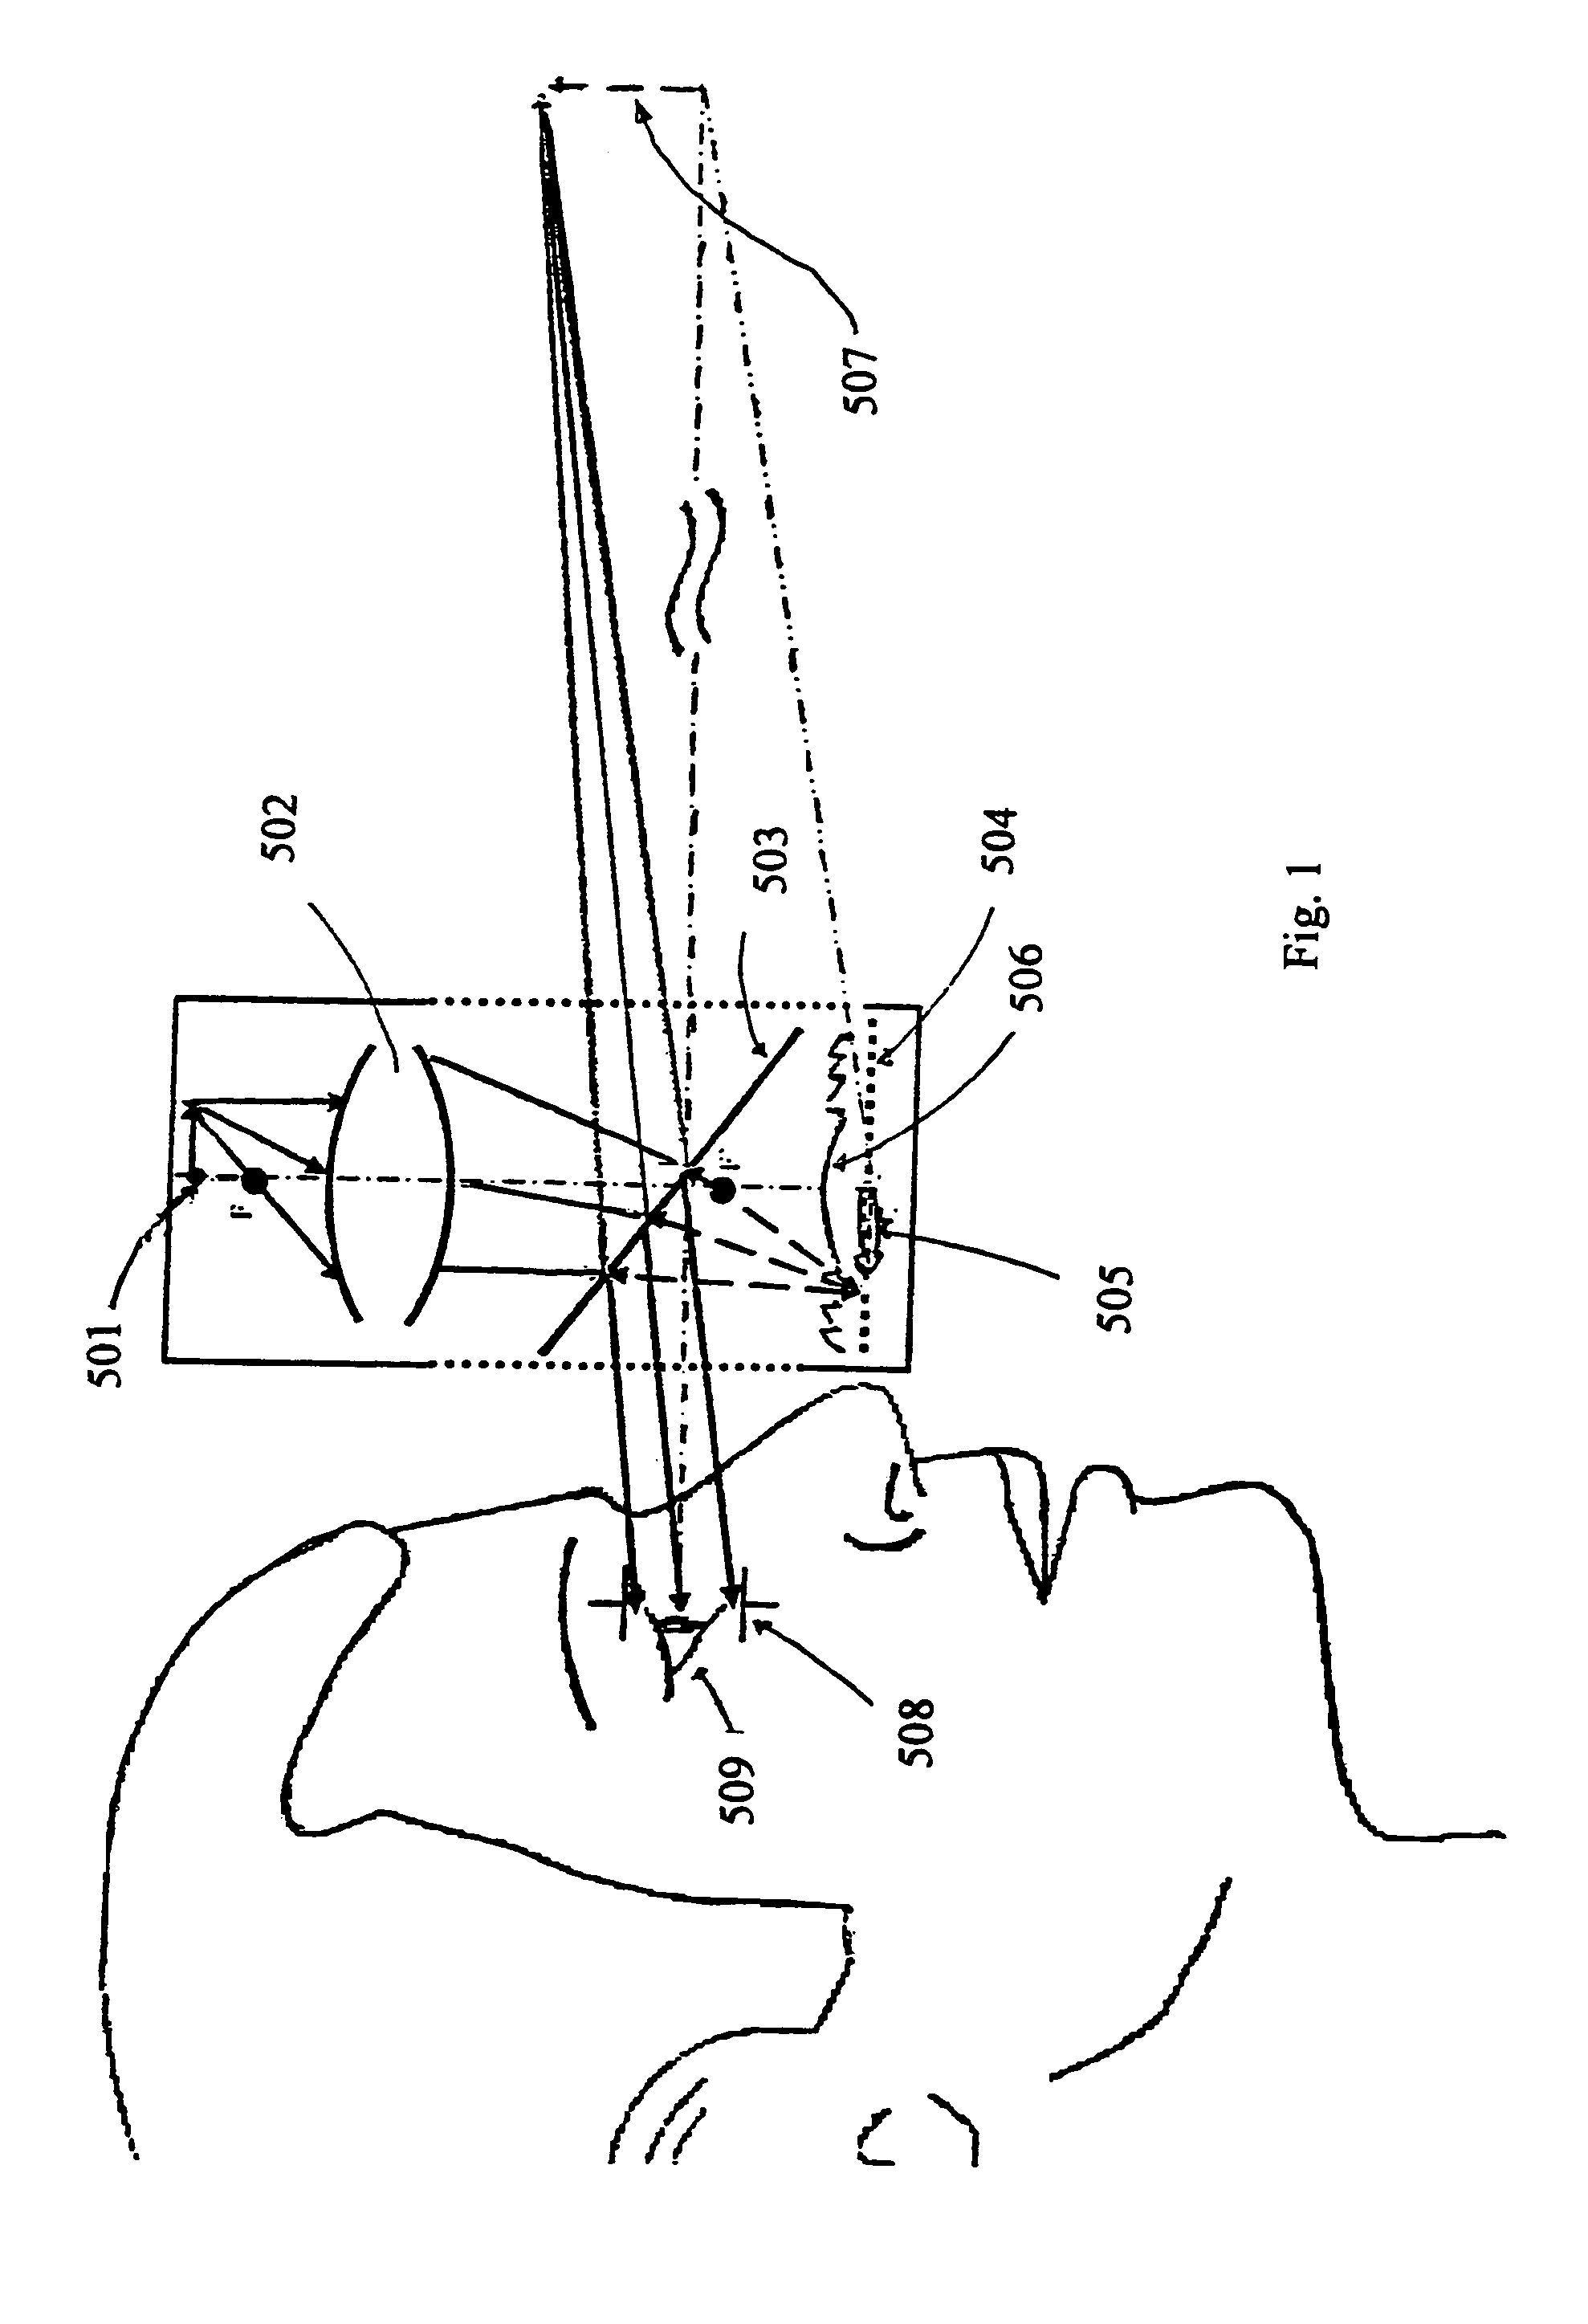 Head-mounted display by integration of phase-conjugate material